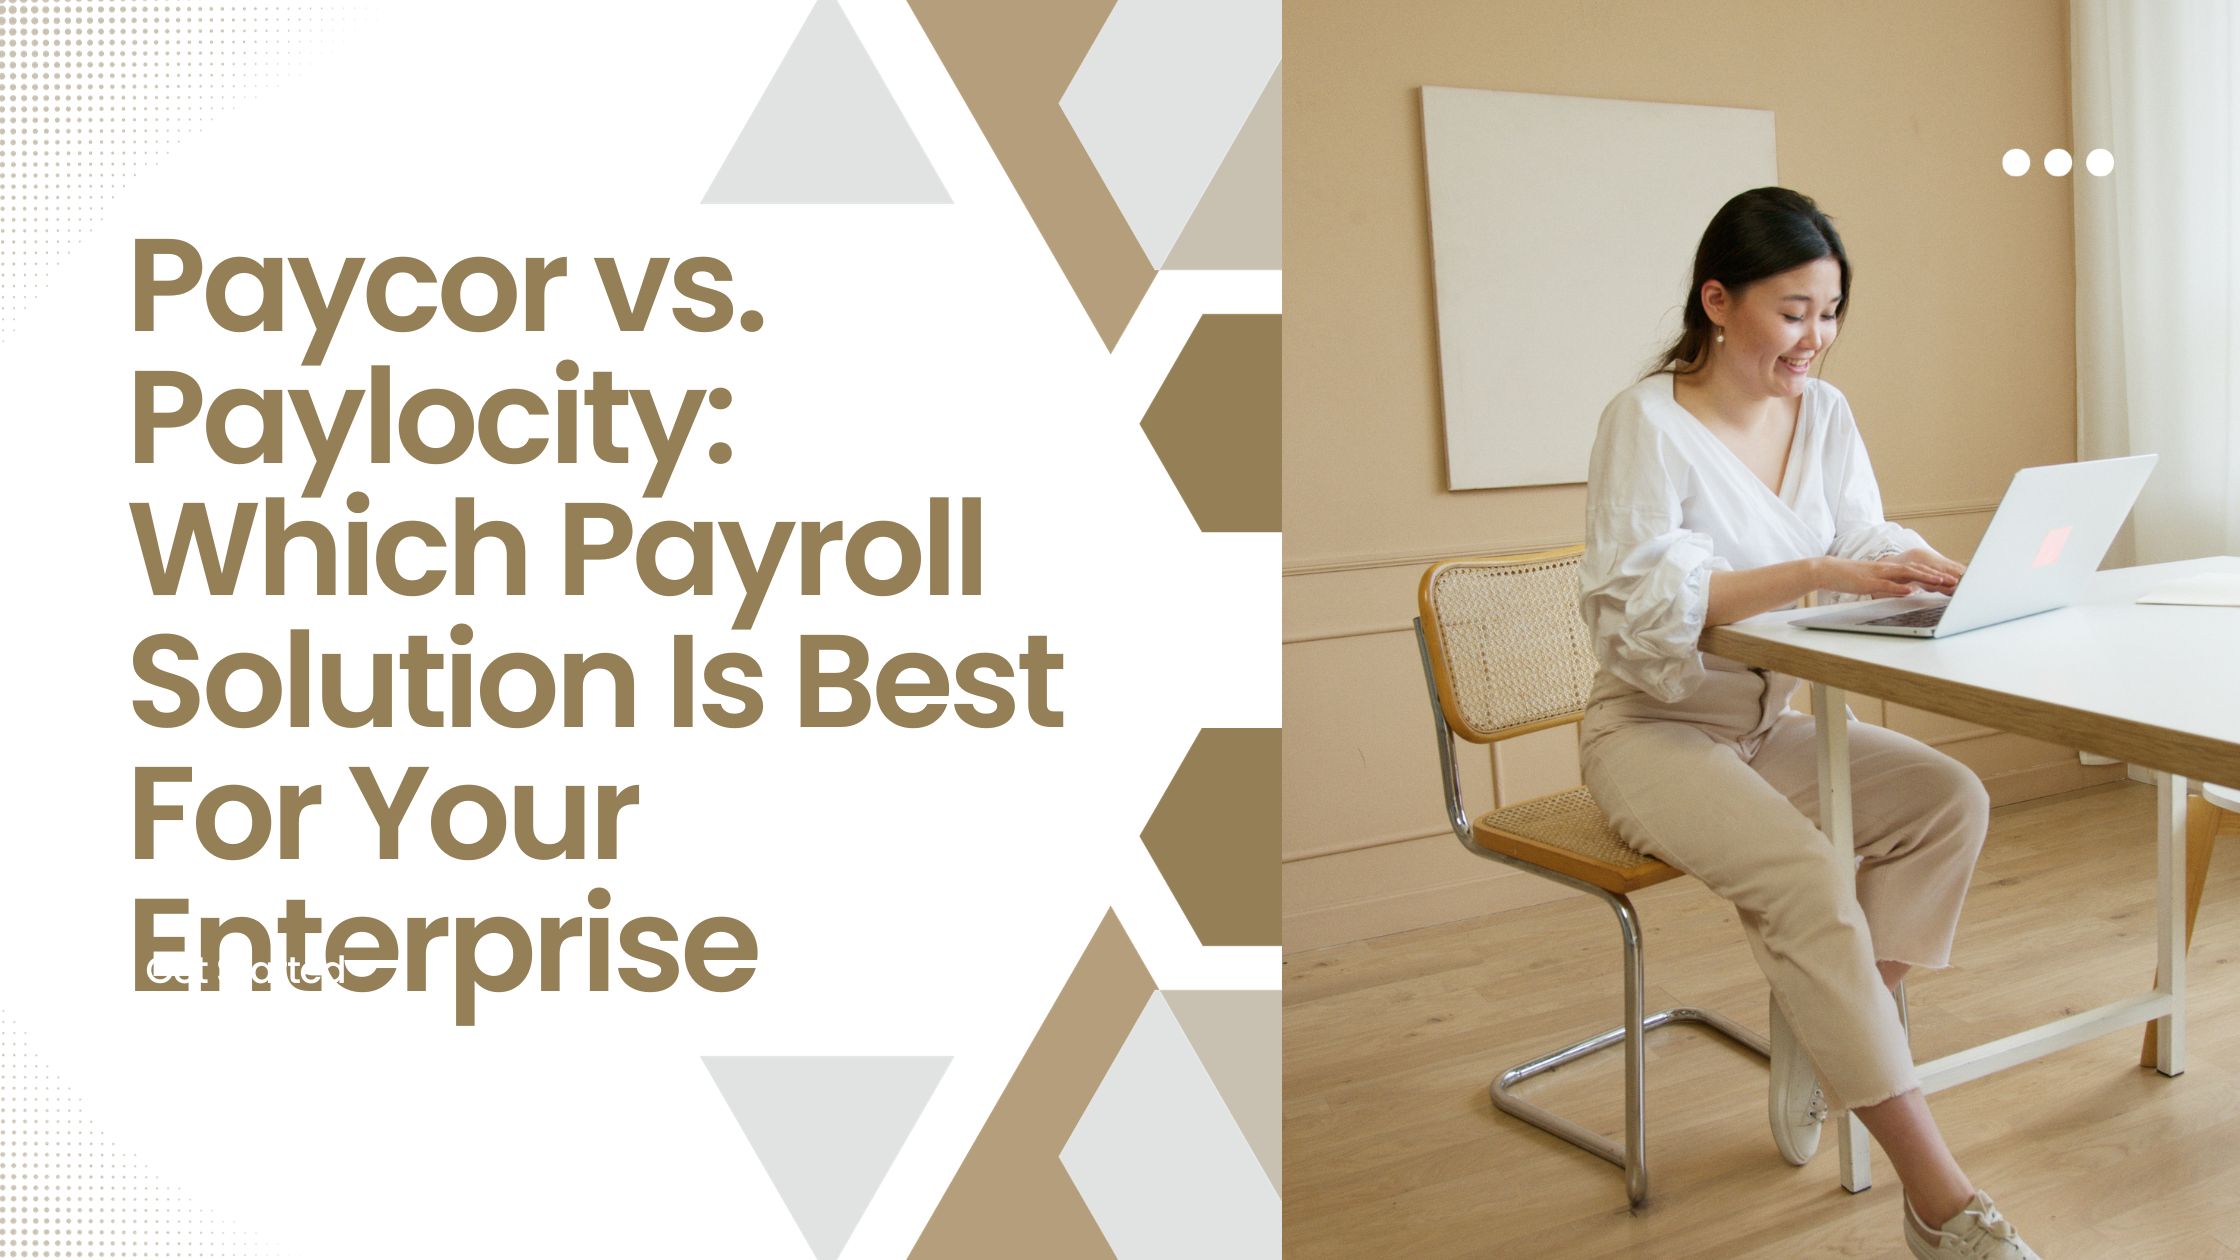 Paycor vs. Paylocity: Which Payroll Solution Is Best For Your Enterprise